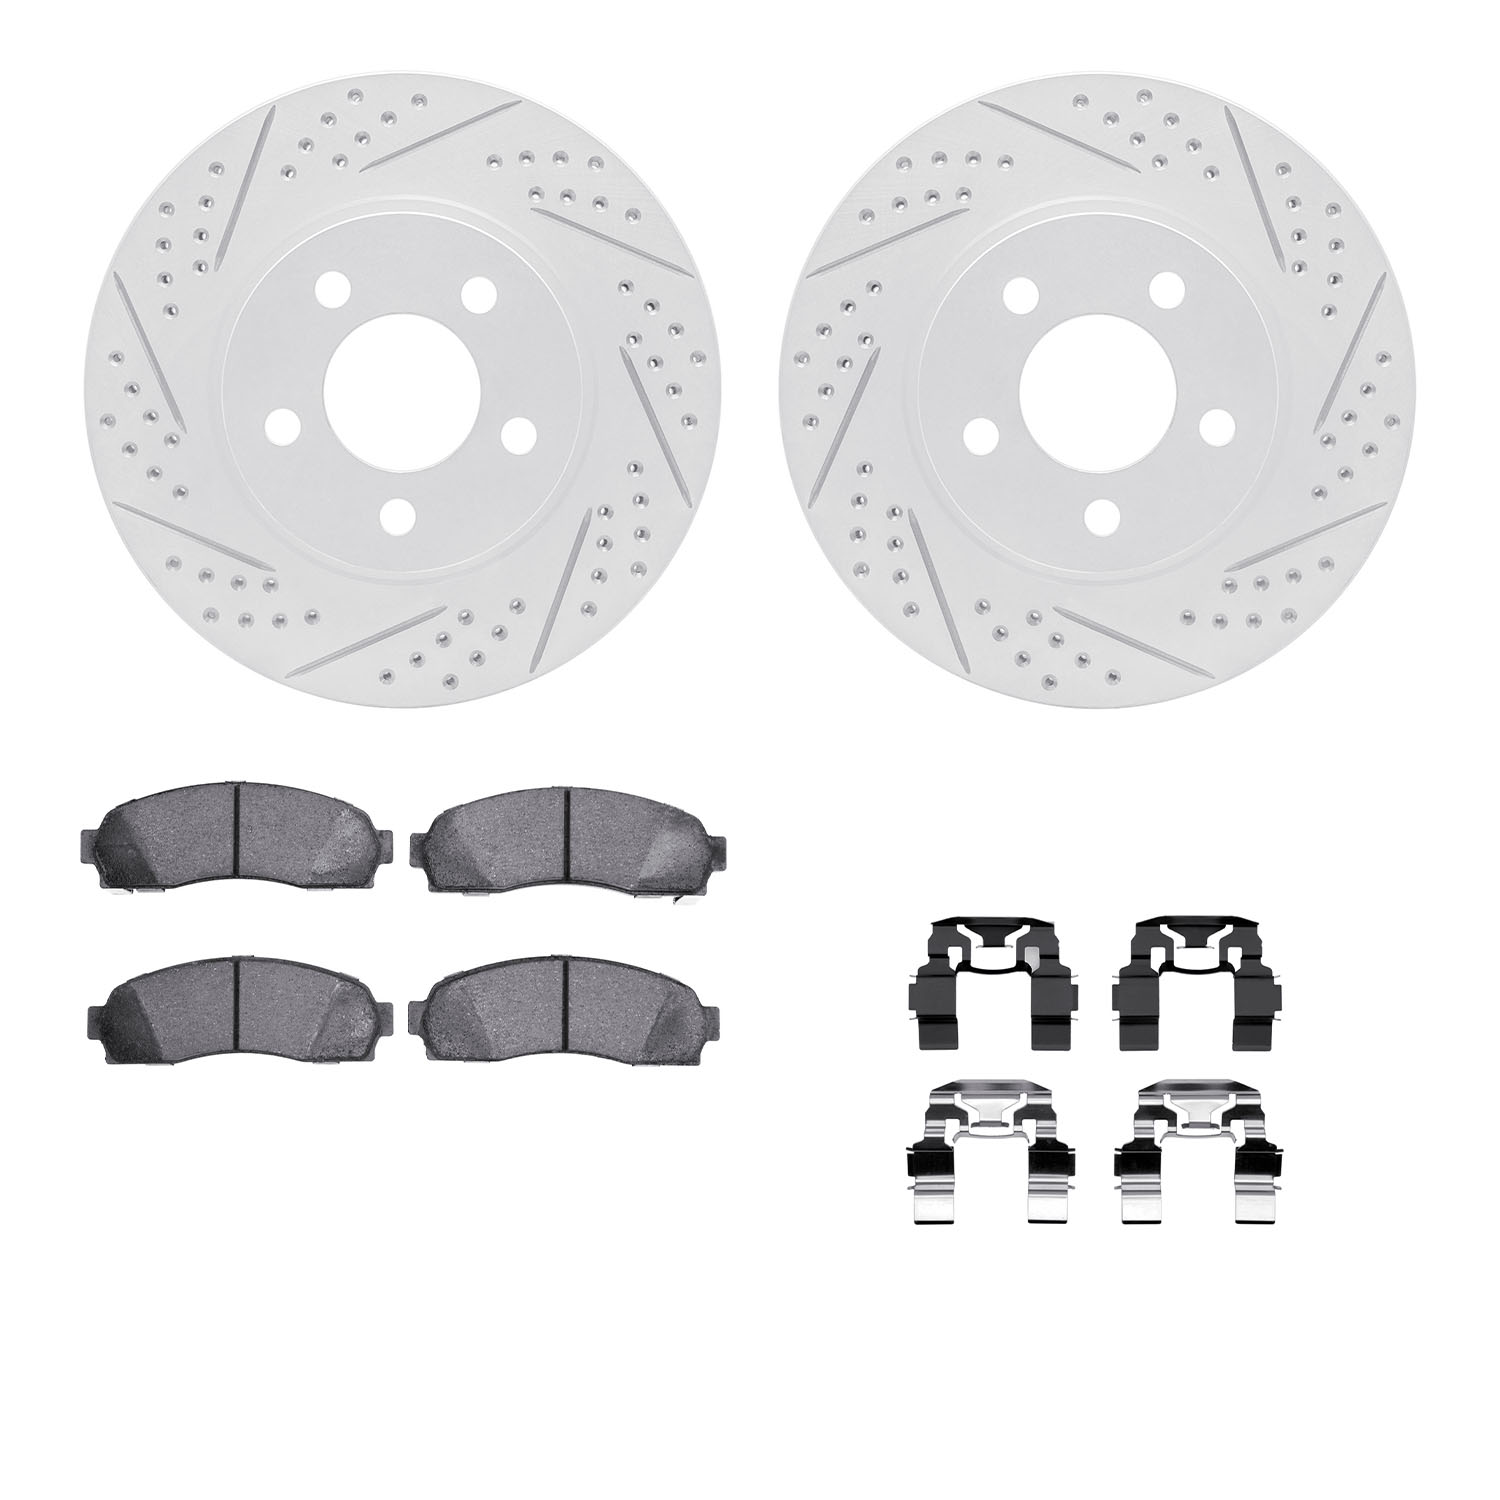 2212-99115 Geoperformance Drilled/Slotted Rotors w/Heavy-Duty Pads Kit & Hardware, 2001-2005 Ford/Lincoln/Mercury/Mazda, Positio